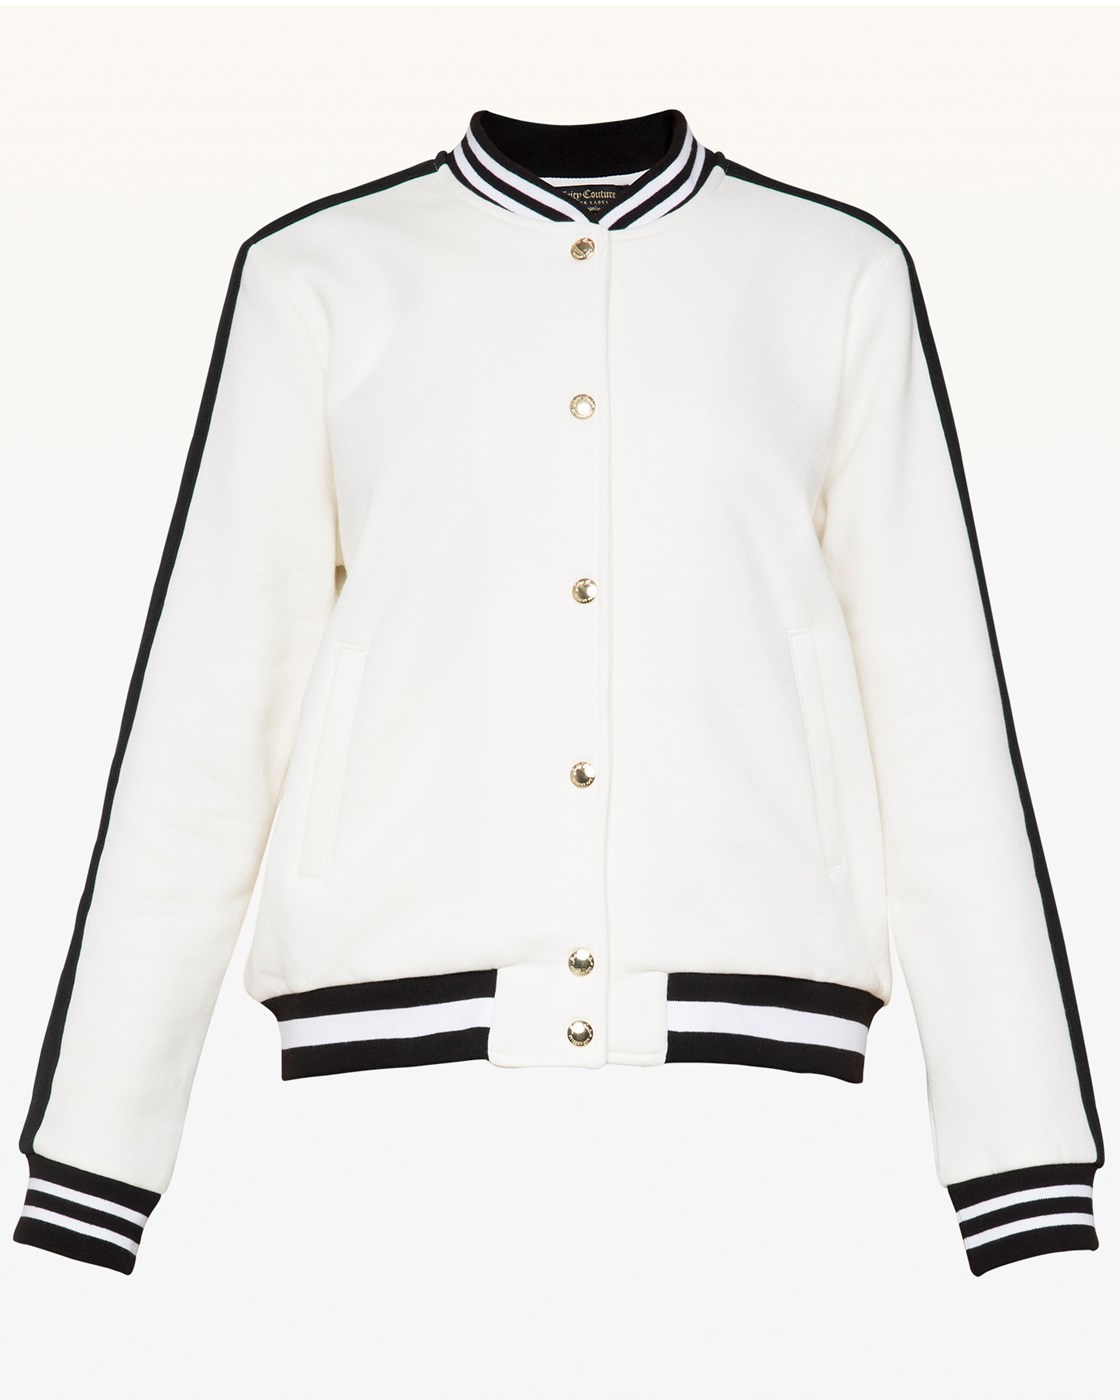 Juicy Couture Luxe Crest Patch Bomber Jacket